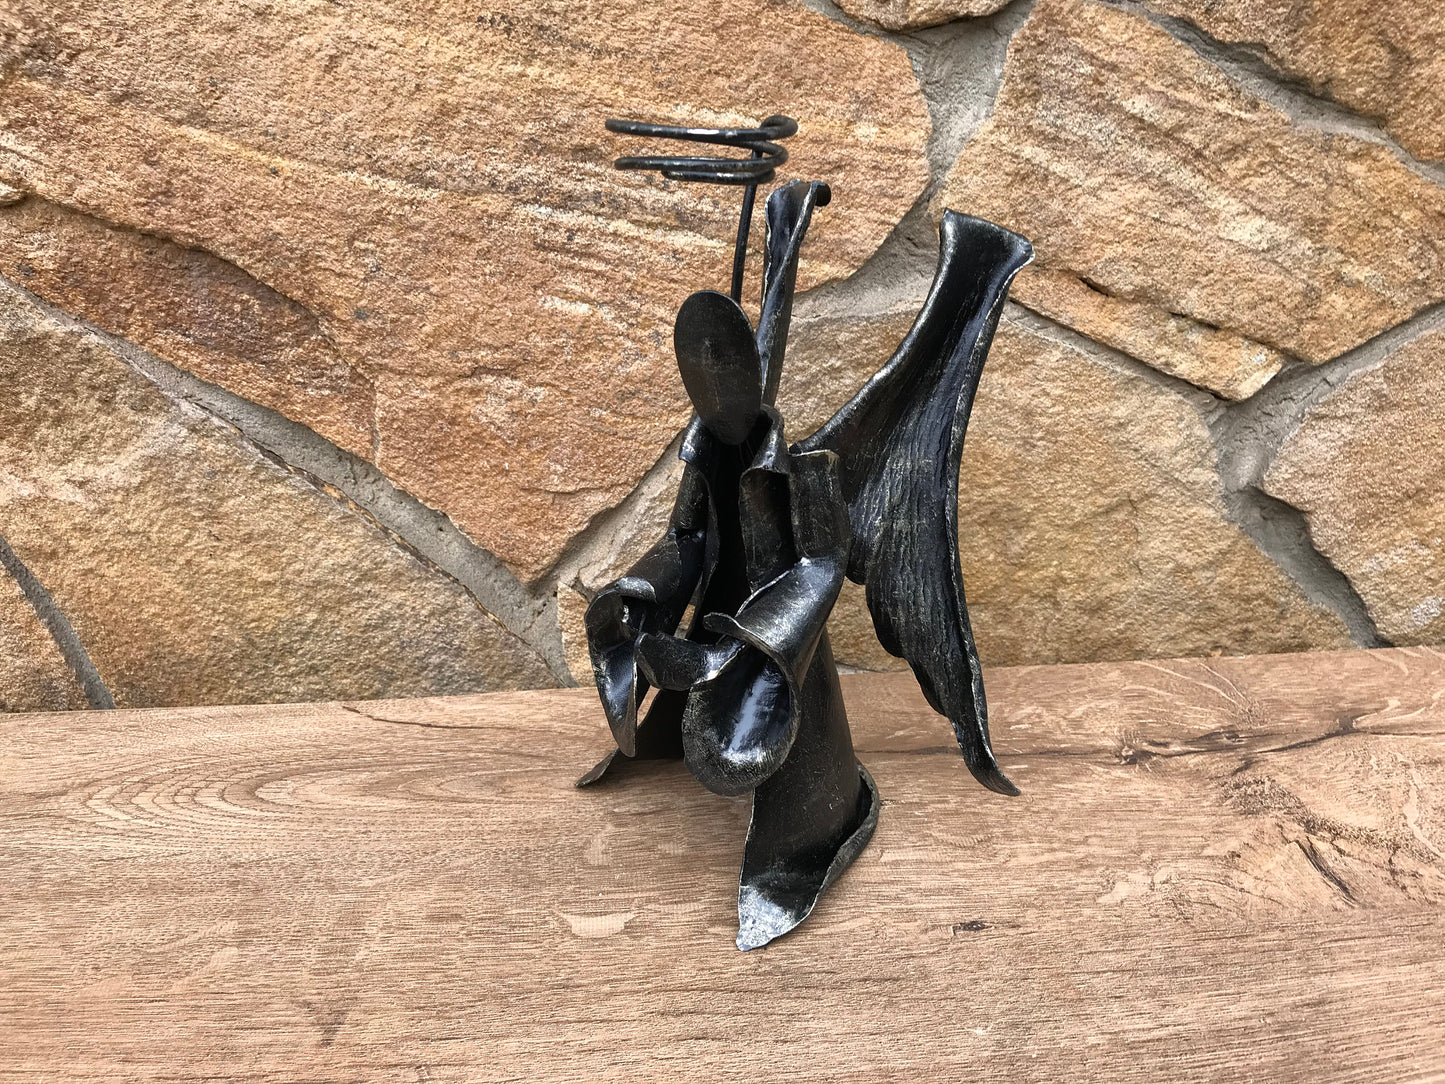 Candle holder, church candle, iron anniversary gift, iron gift, agel, church, candlestick holder, church charm, angel wings, church gifts